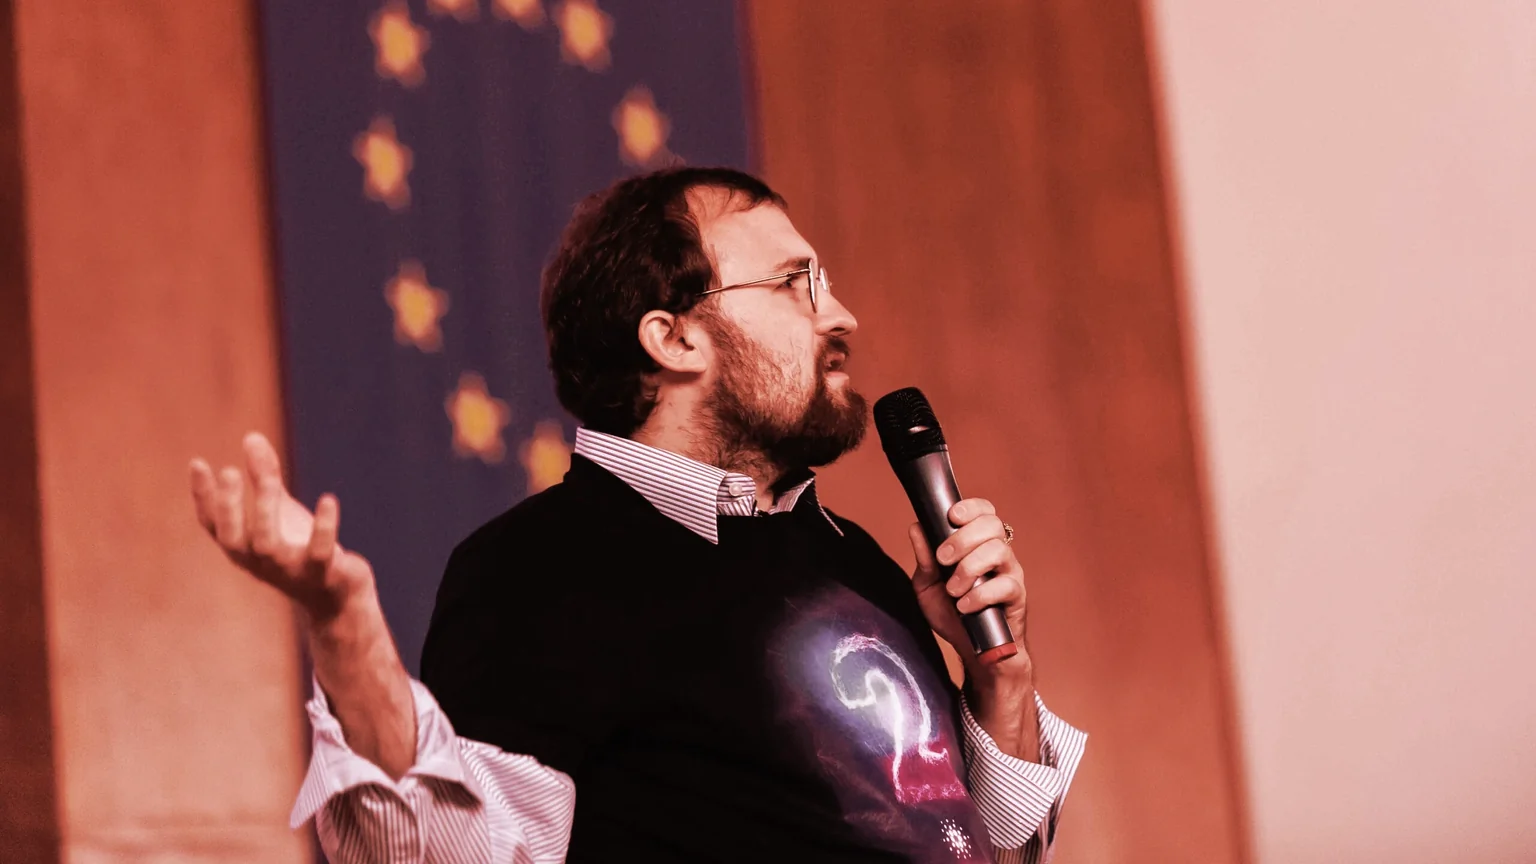 Charles Hoskinson, speaking at the Cardano Summit in Bulgaria in 2019. Image: Decrypt.